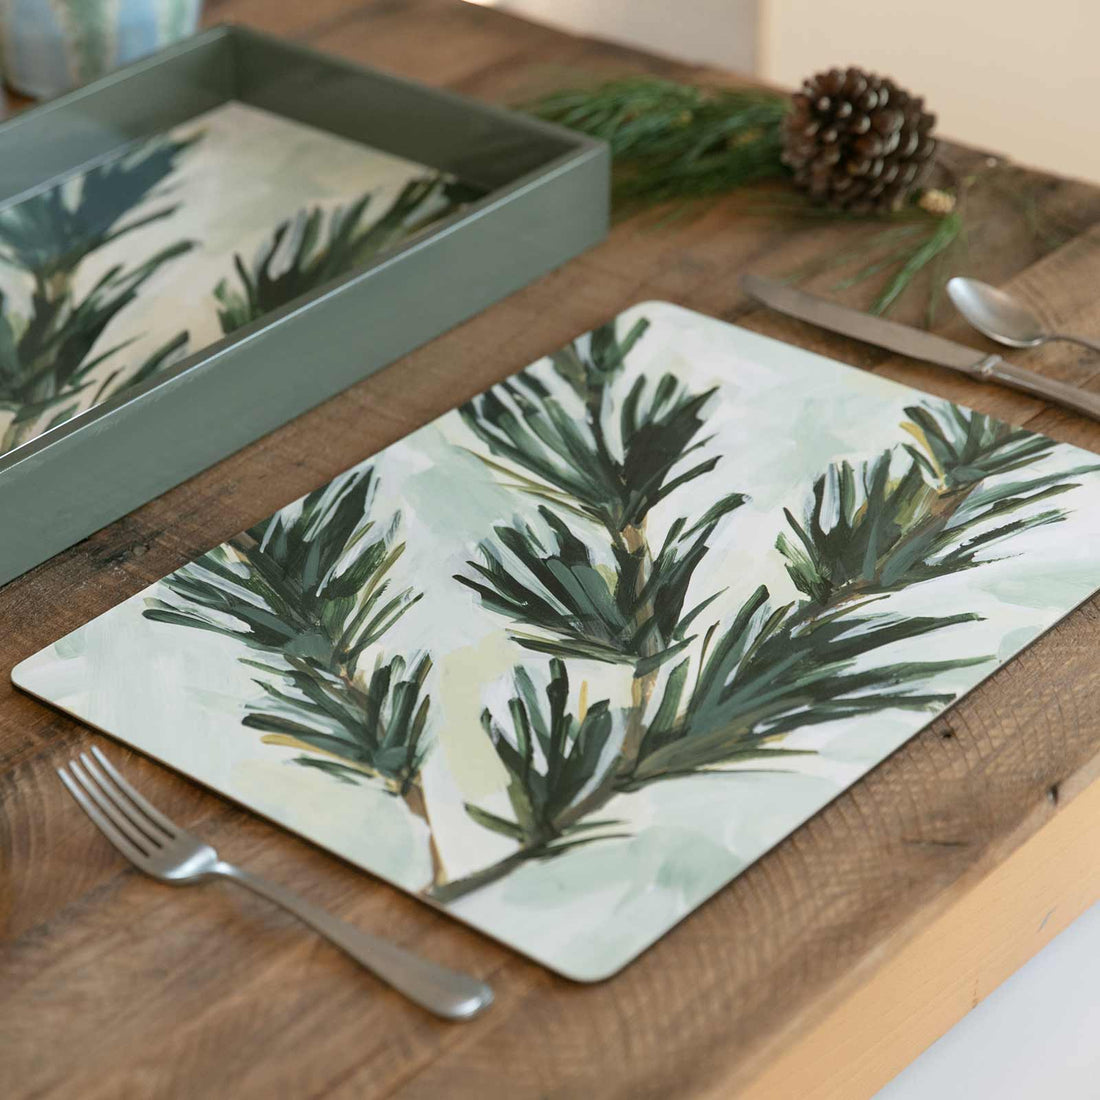 Abstract Spruce Branch Art Placemats - Set of 4 Placemat - rockflowerpaper